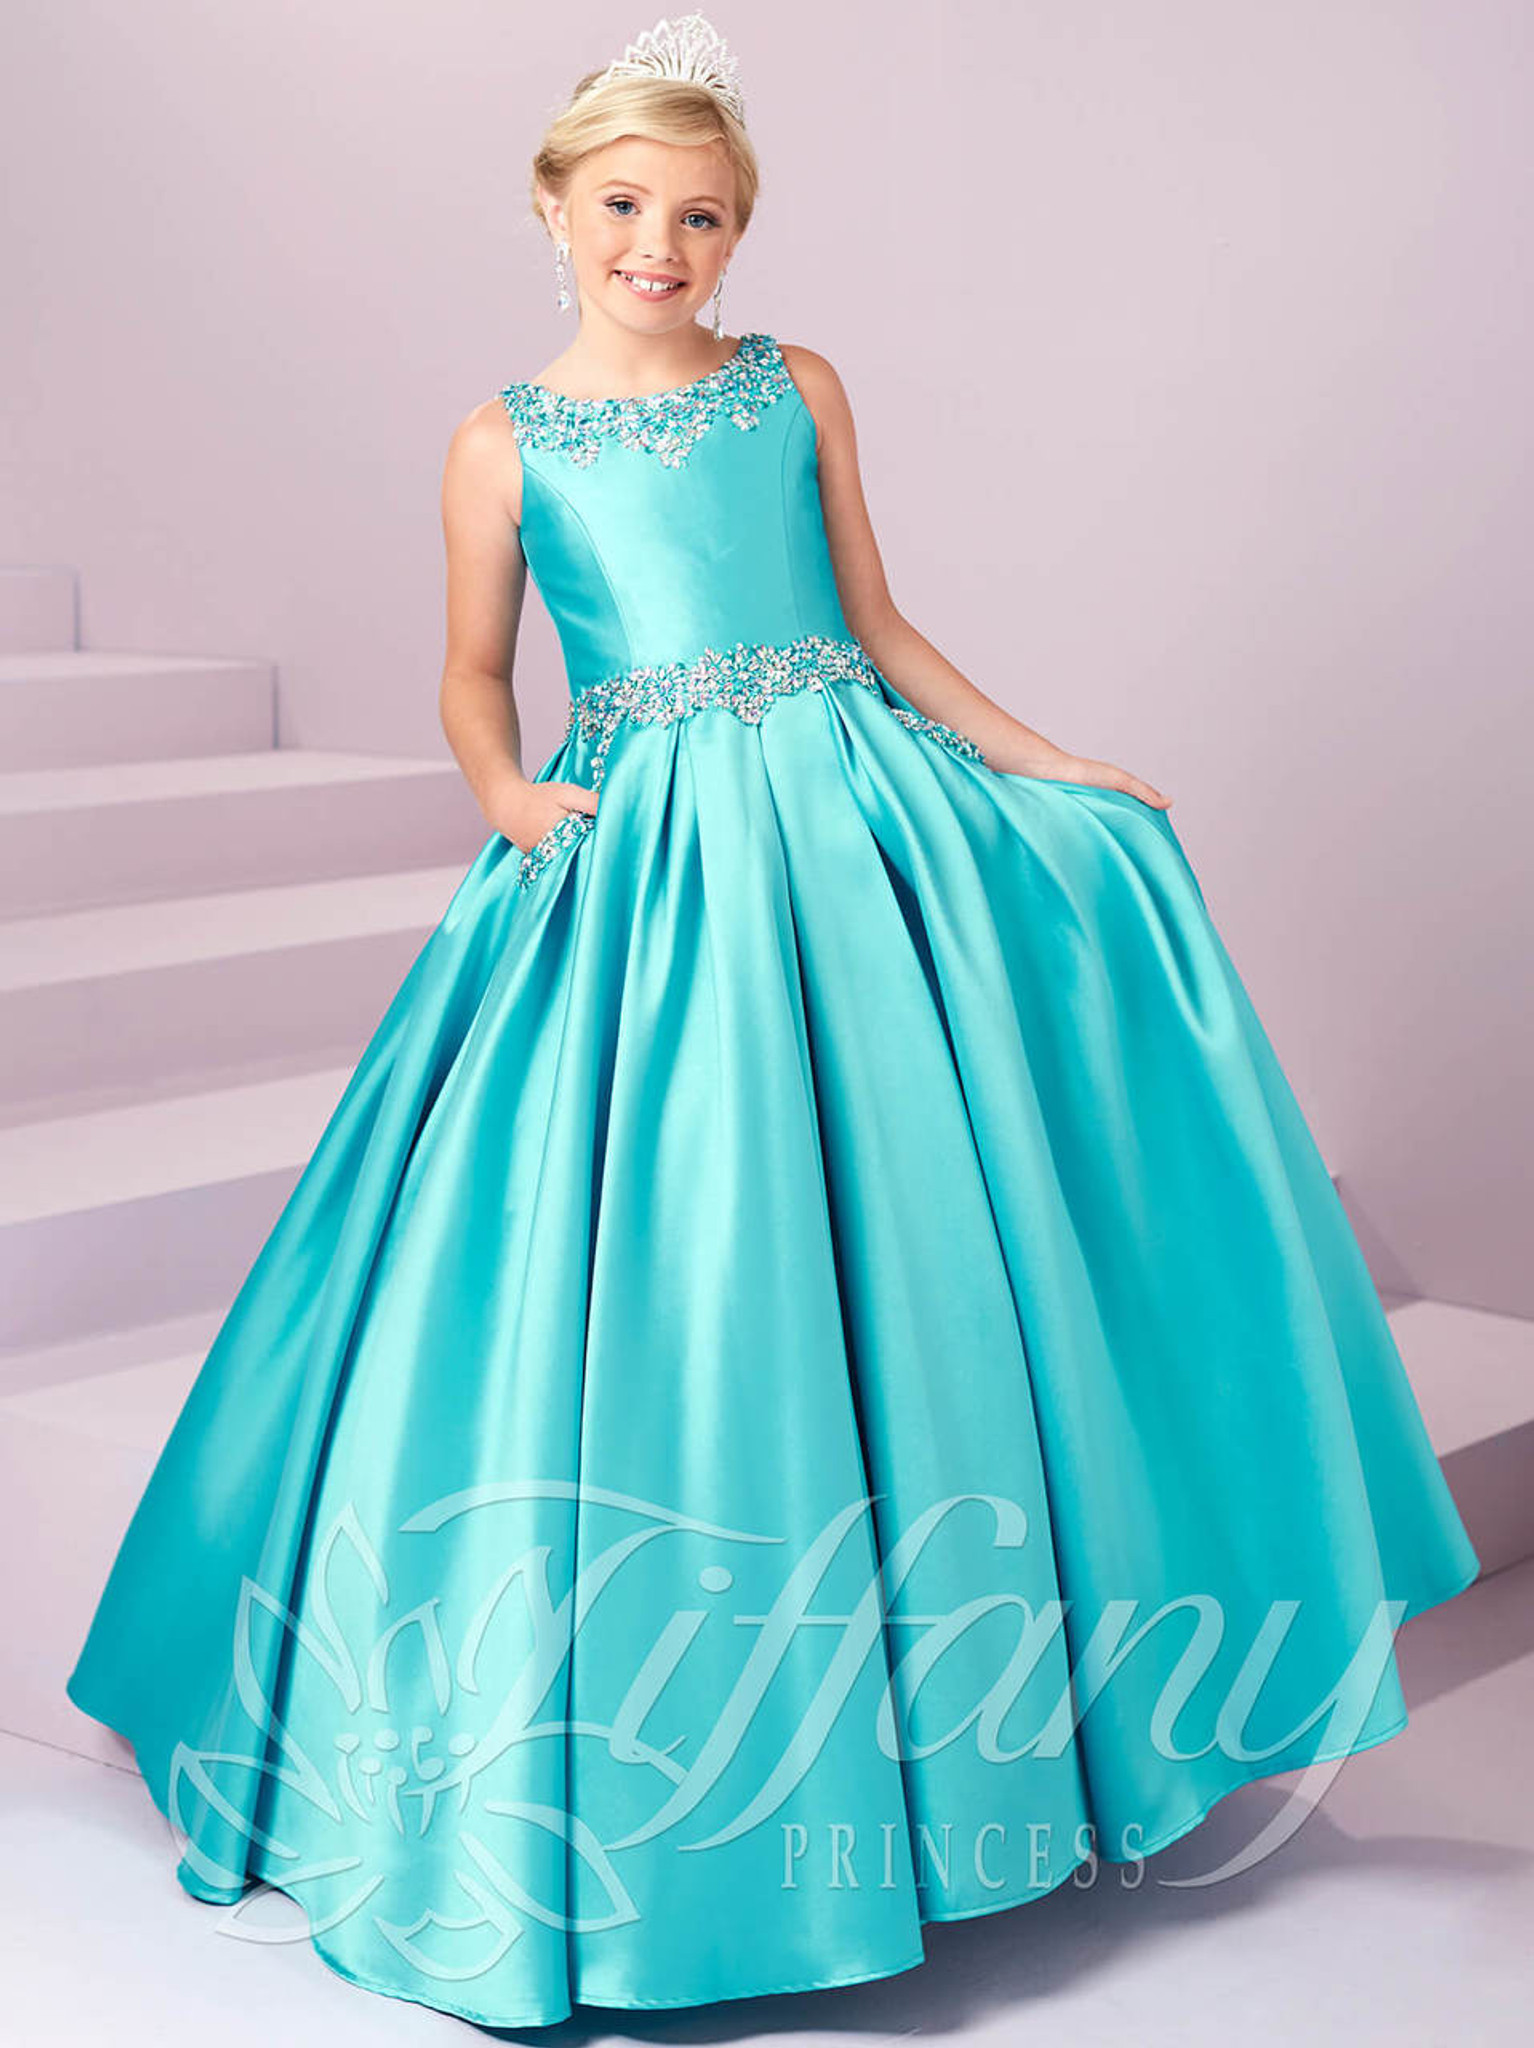 Pocketed Skirt Pageant Dress by Tiffany Princess 13485